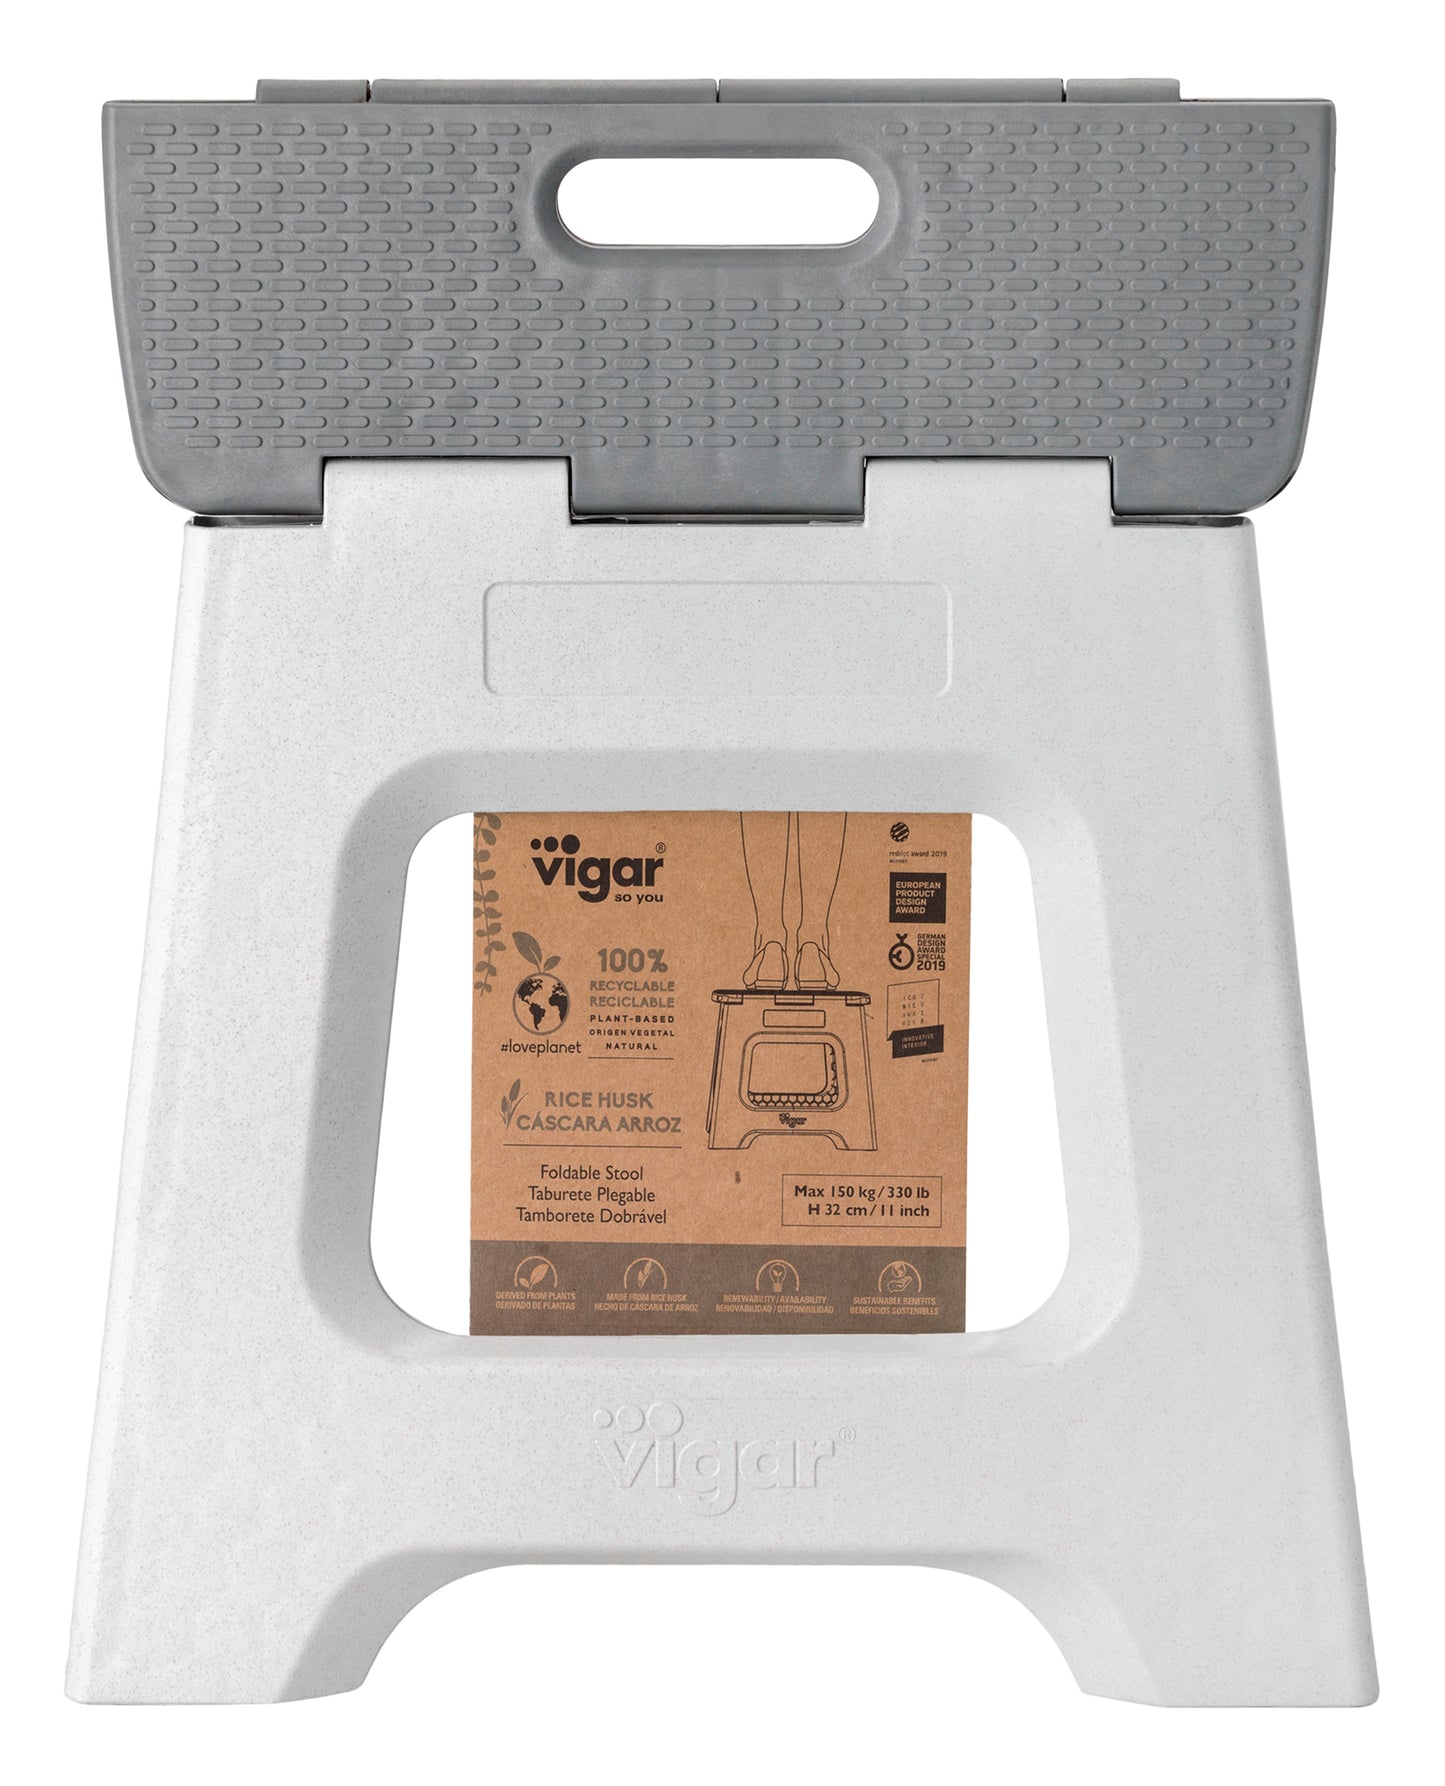 Vigar Compact Foldable Stool 100% Recycled Plastic Zeroline Grey